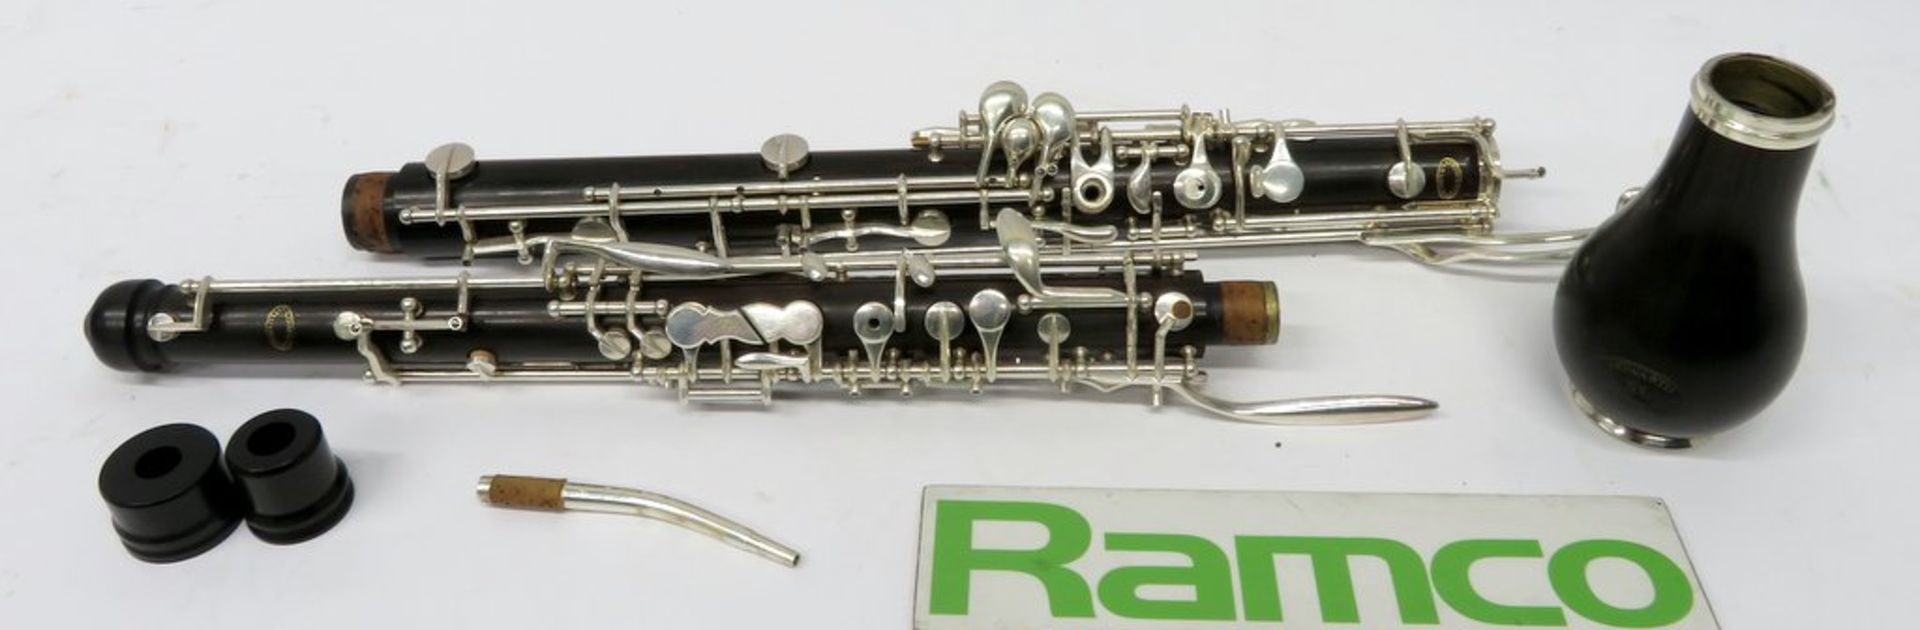 Howarth Cor Anglais S5 Complete With Case. - Image 16 of 18